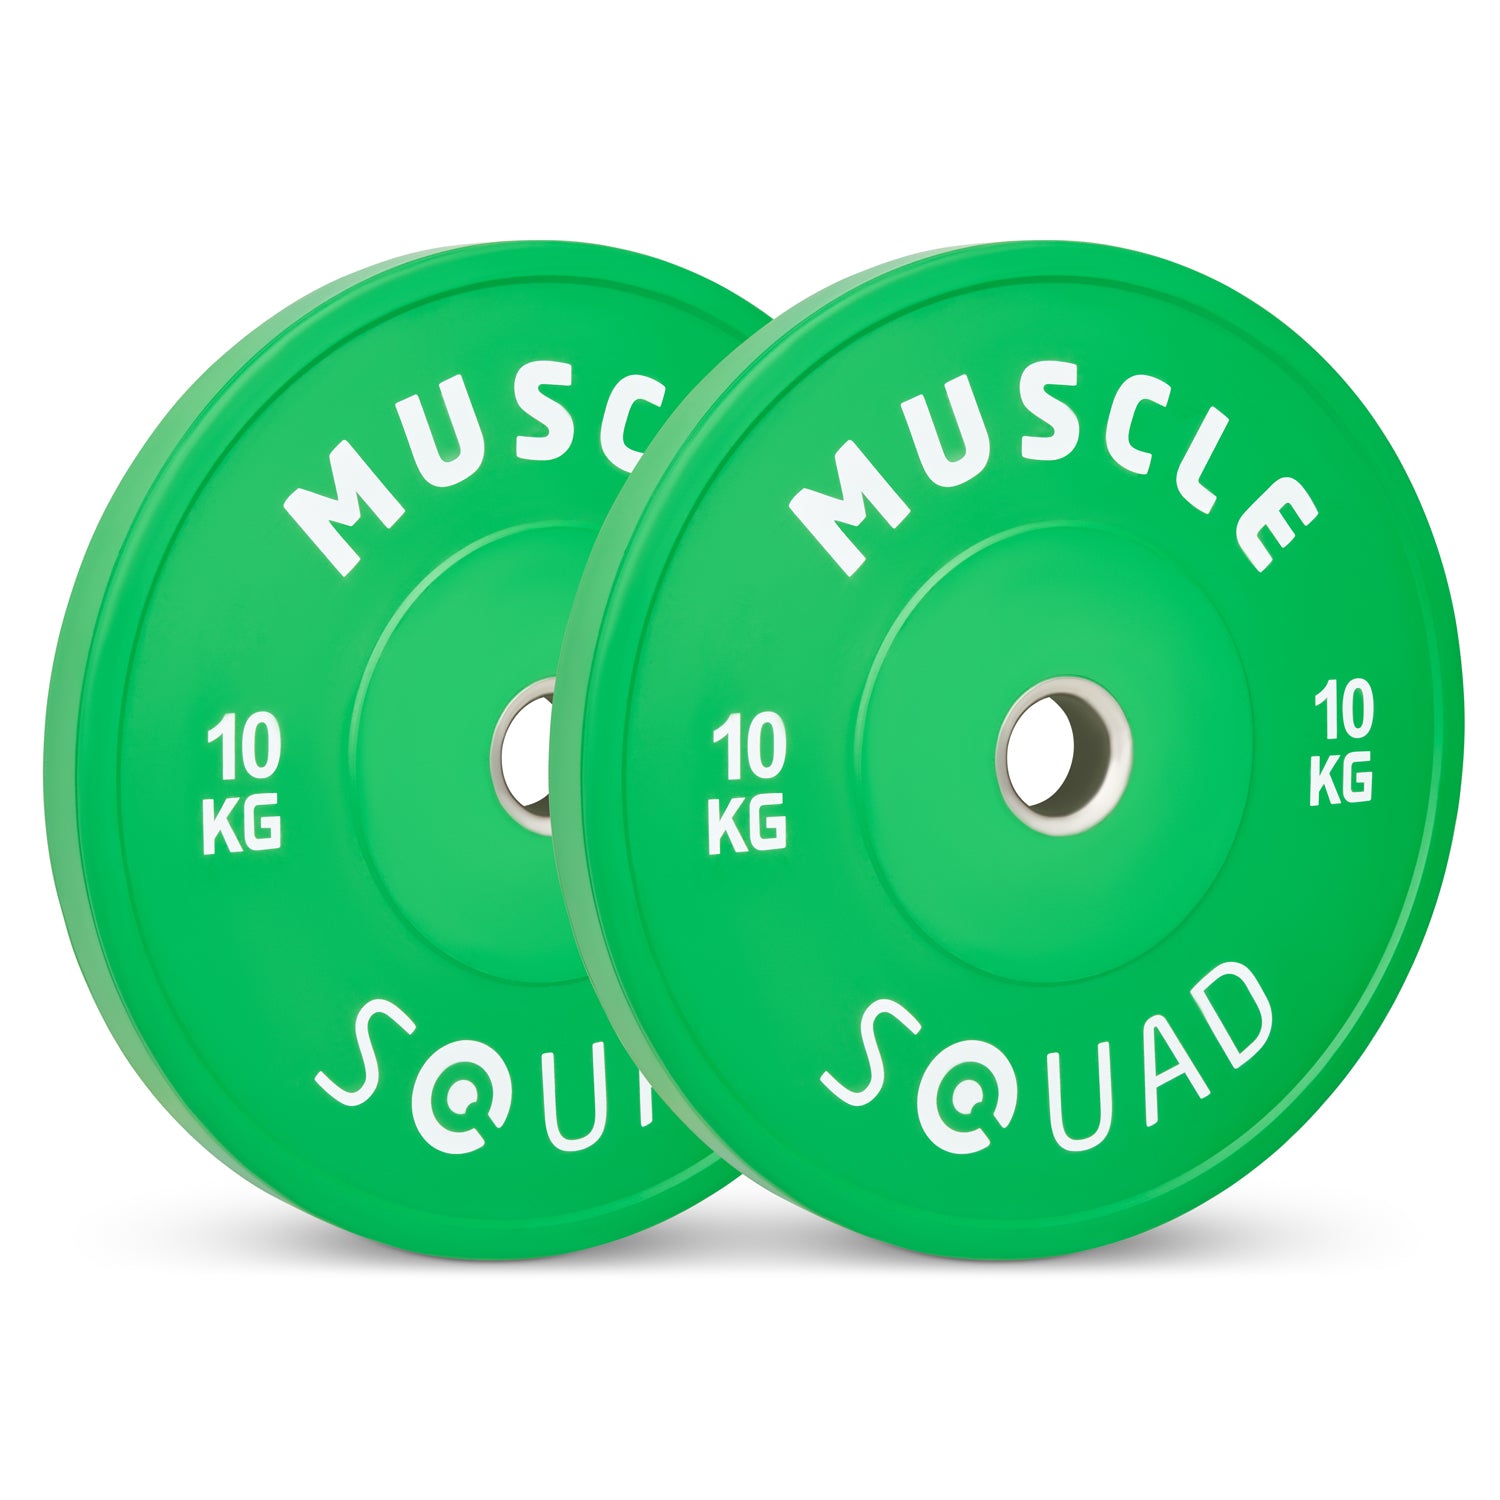 Rubber Coloured Bumper Olympic Weight Plates